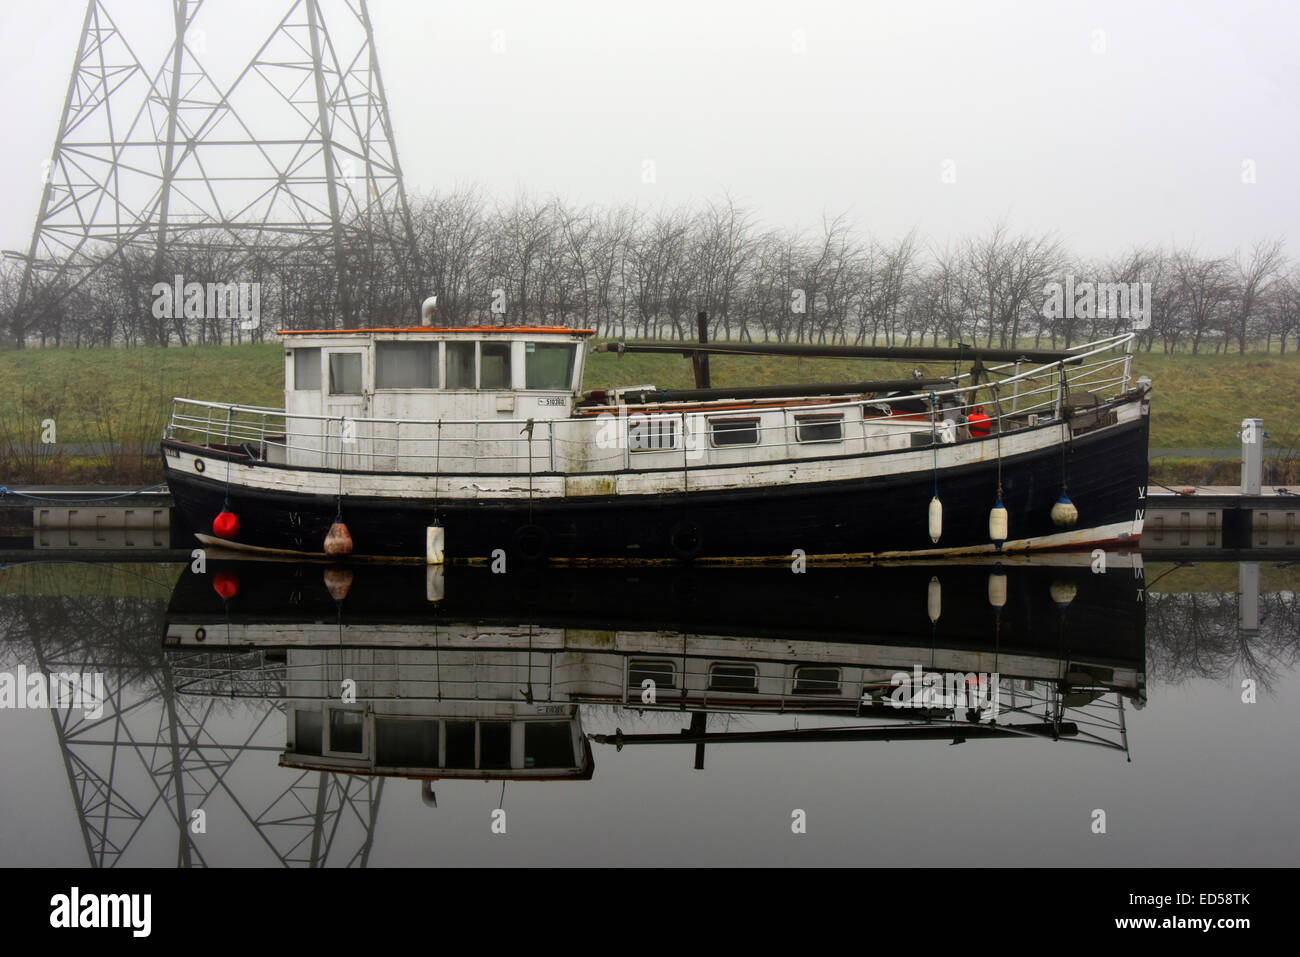 Cruiser on the Forth and Clyde canal. The Helix, Falkirk, Scotland, United Kingdom, Europe. Stock Photo